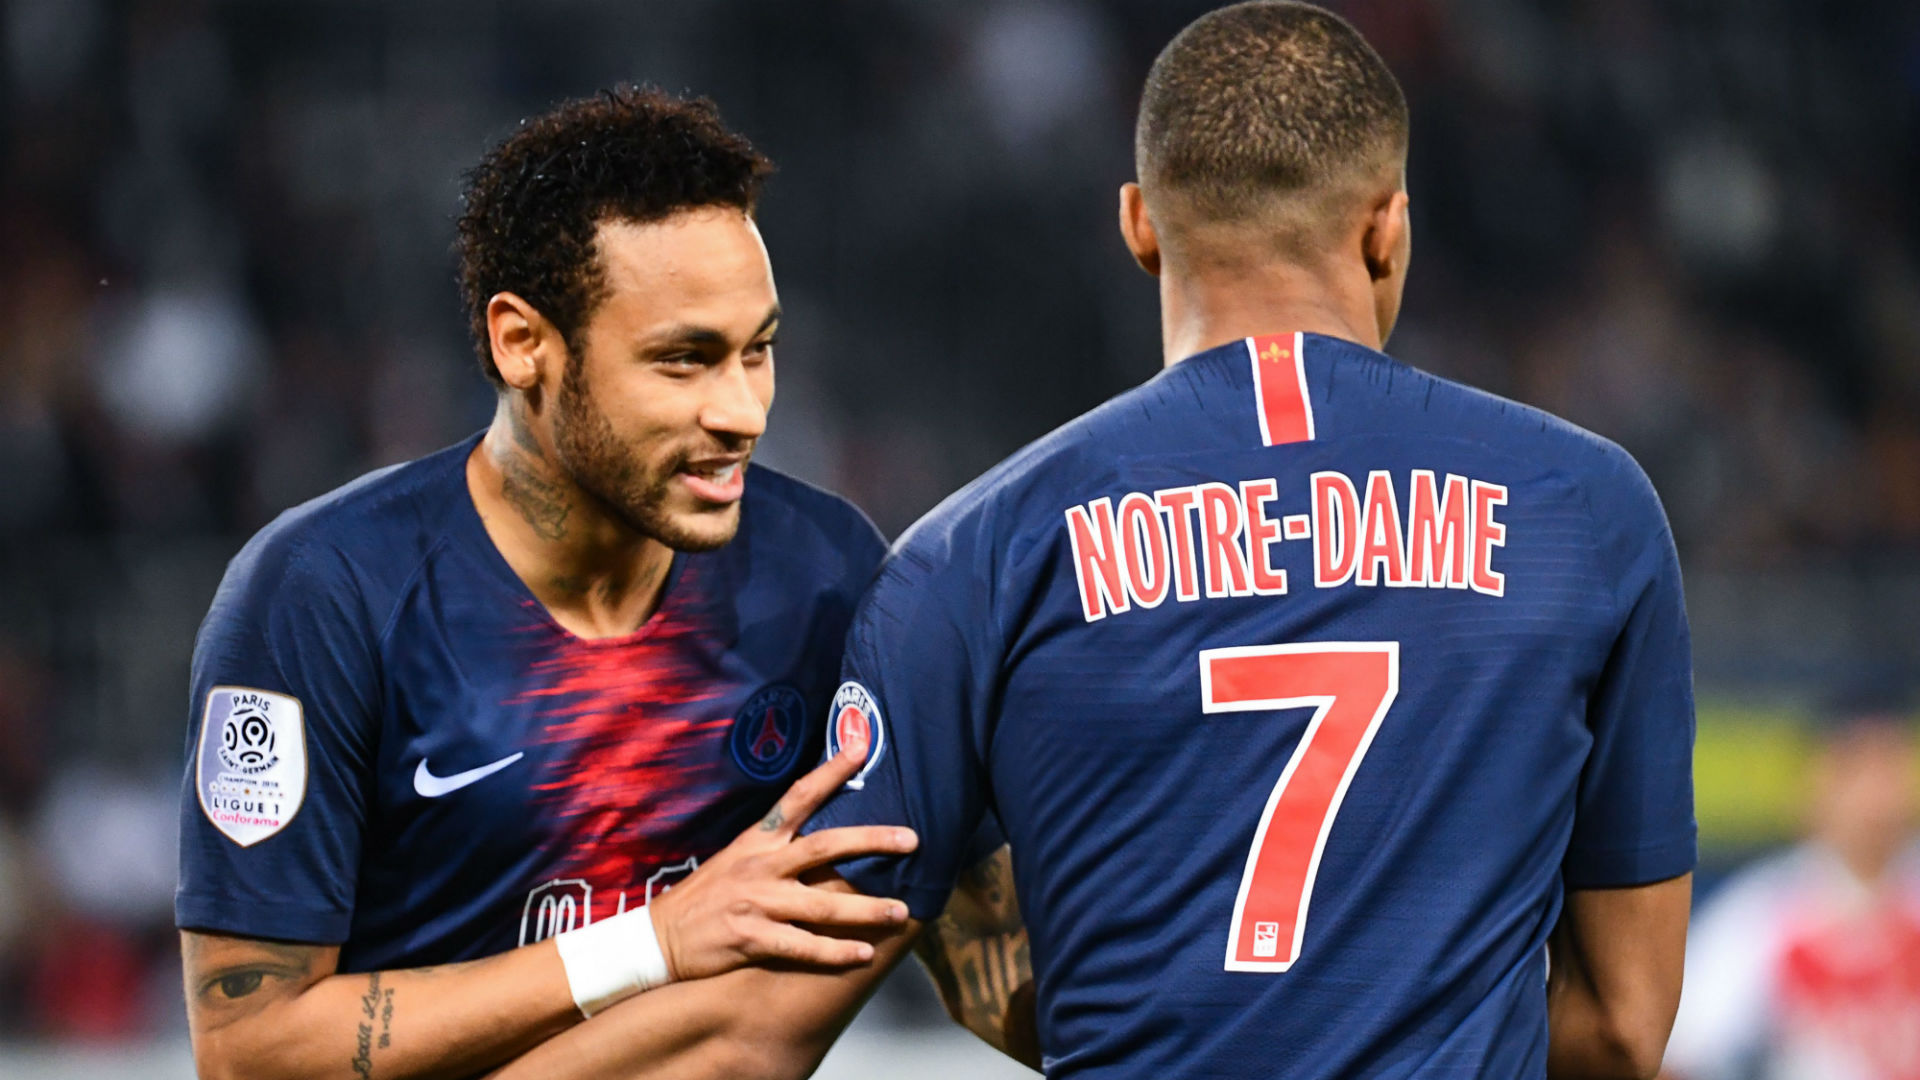 Paris Saint-Germain celebrated their title success with a Kylian Mbappe-inspired win over Monaco, while Neymar returned from injury.